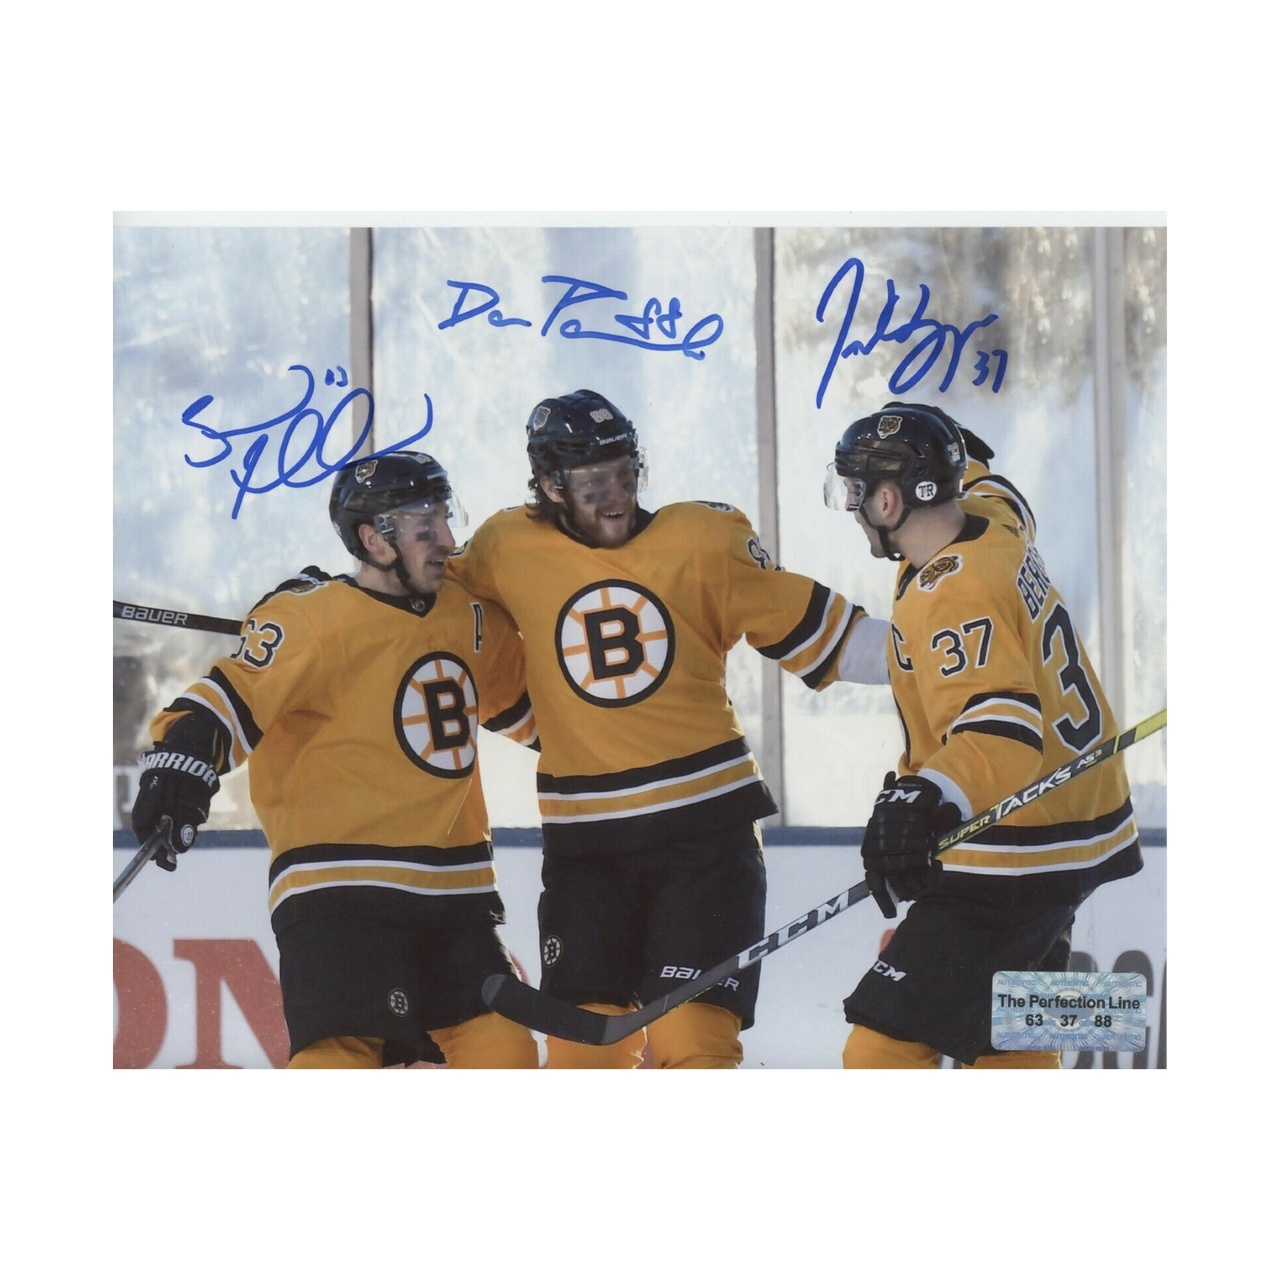 Patrice Bergeron and Brad Marchand Signed / Autographed Photo 16x20 Frame